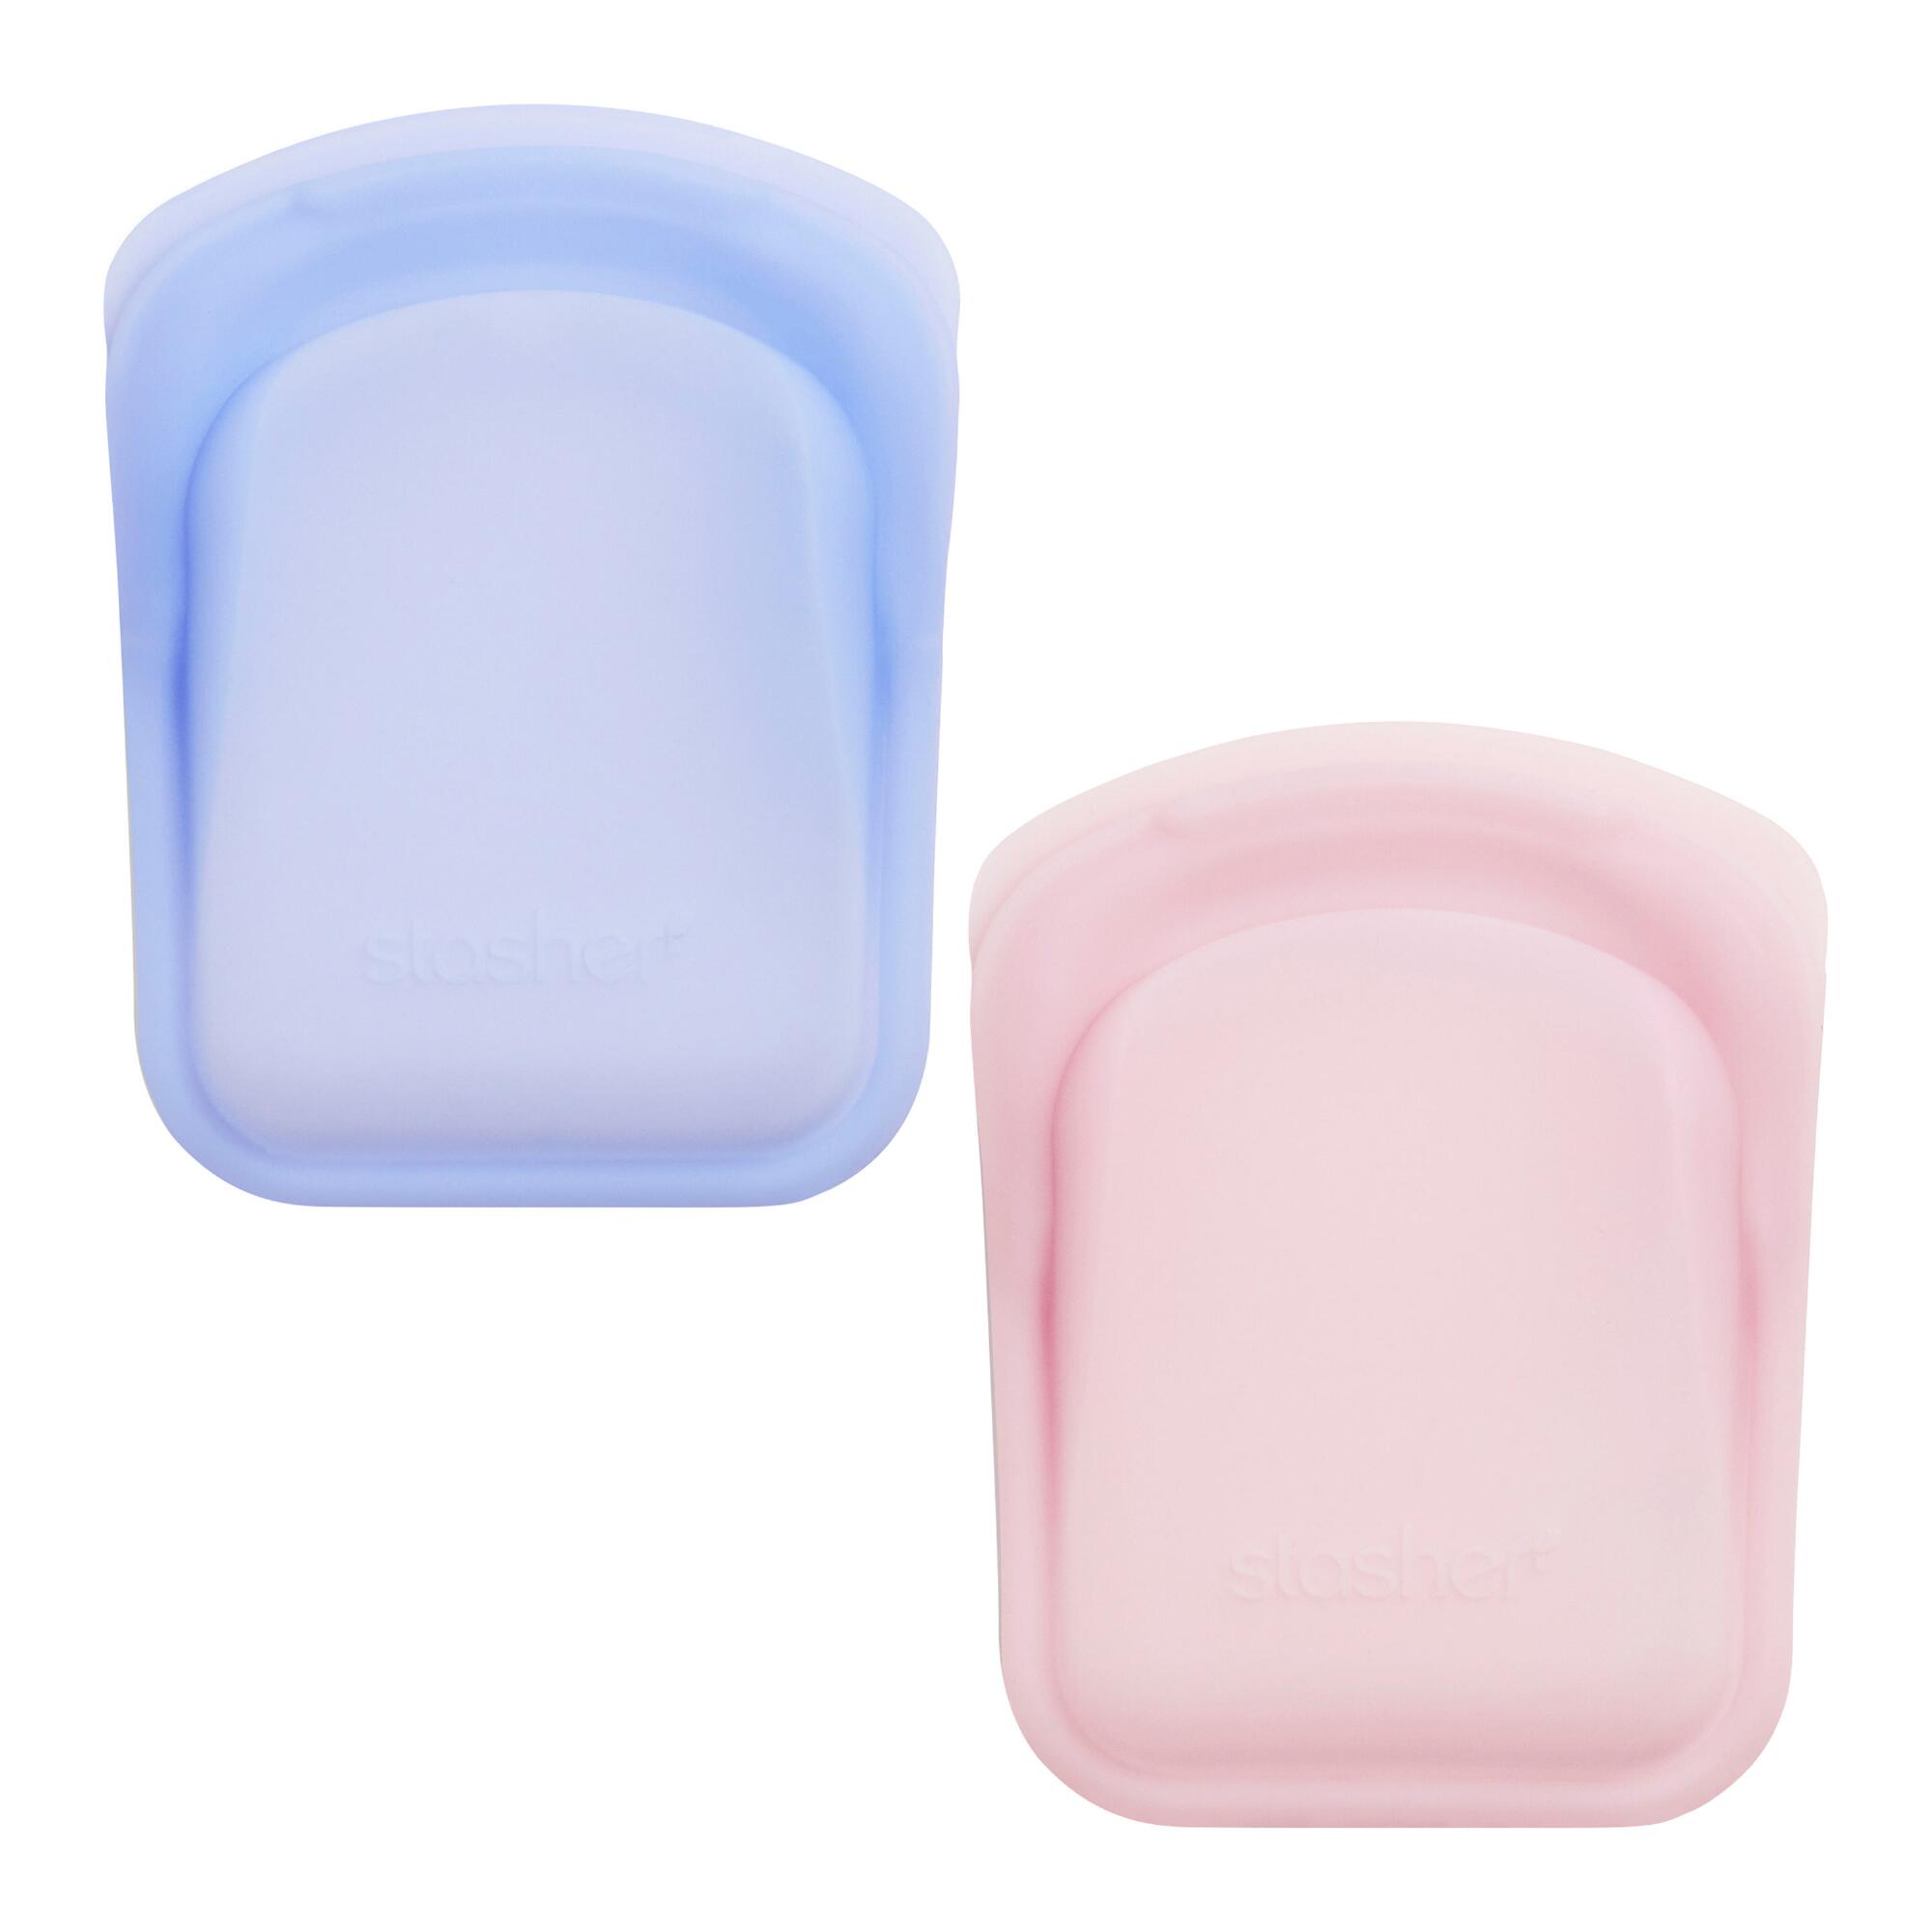 Stasher Pastel Reusable Silicone Pocket Storage Bags 2 Pack: Multi by World Market